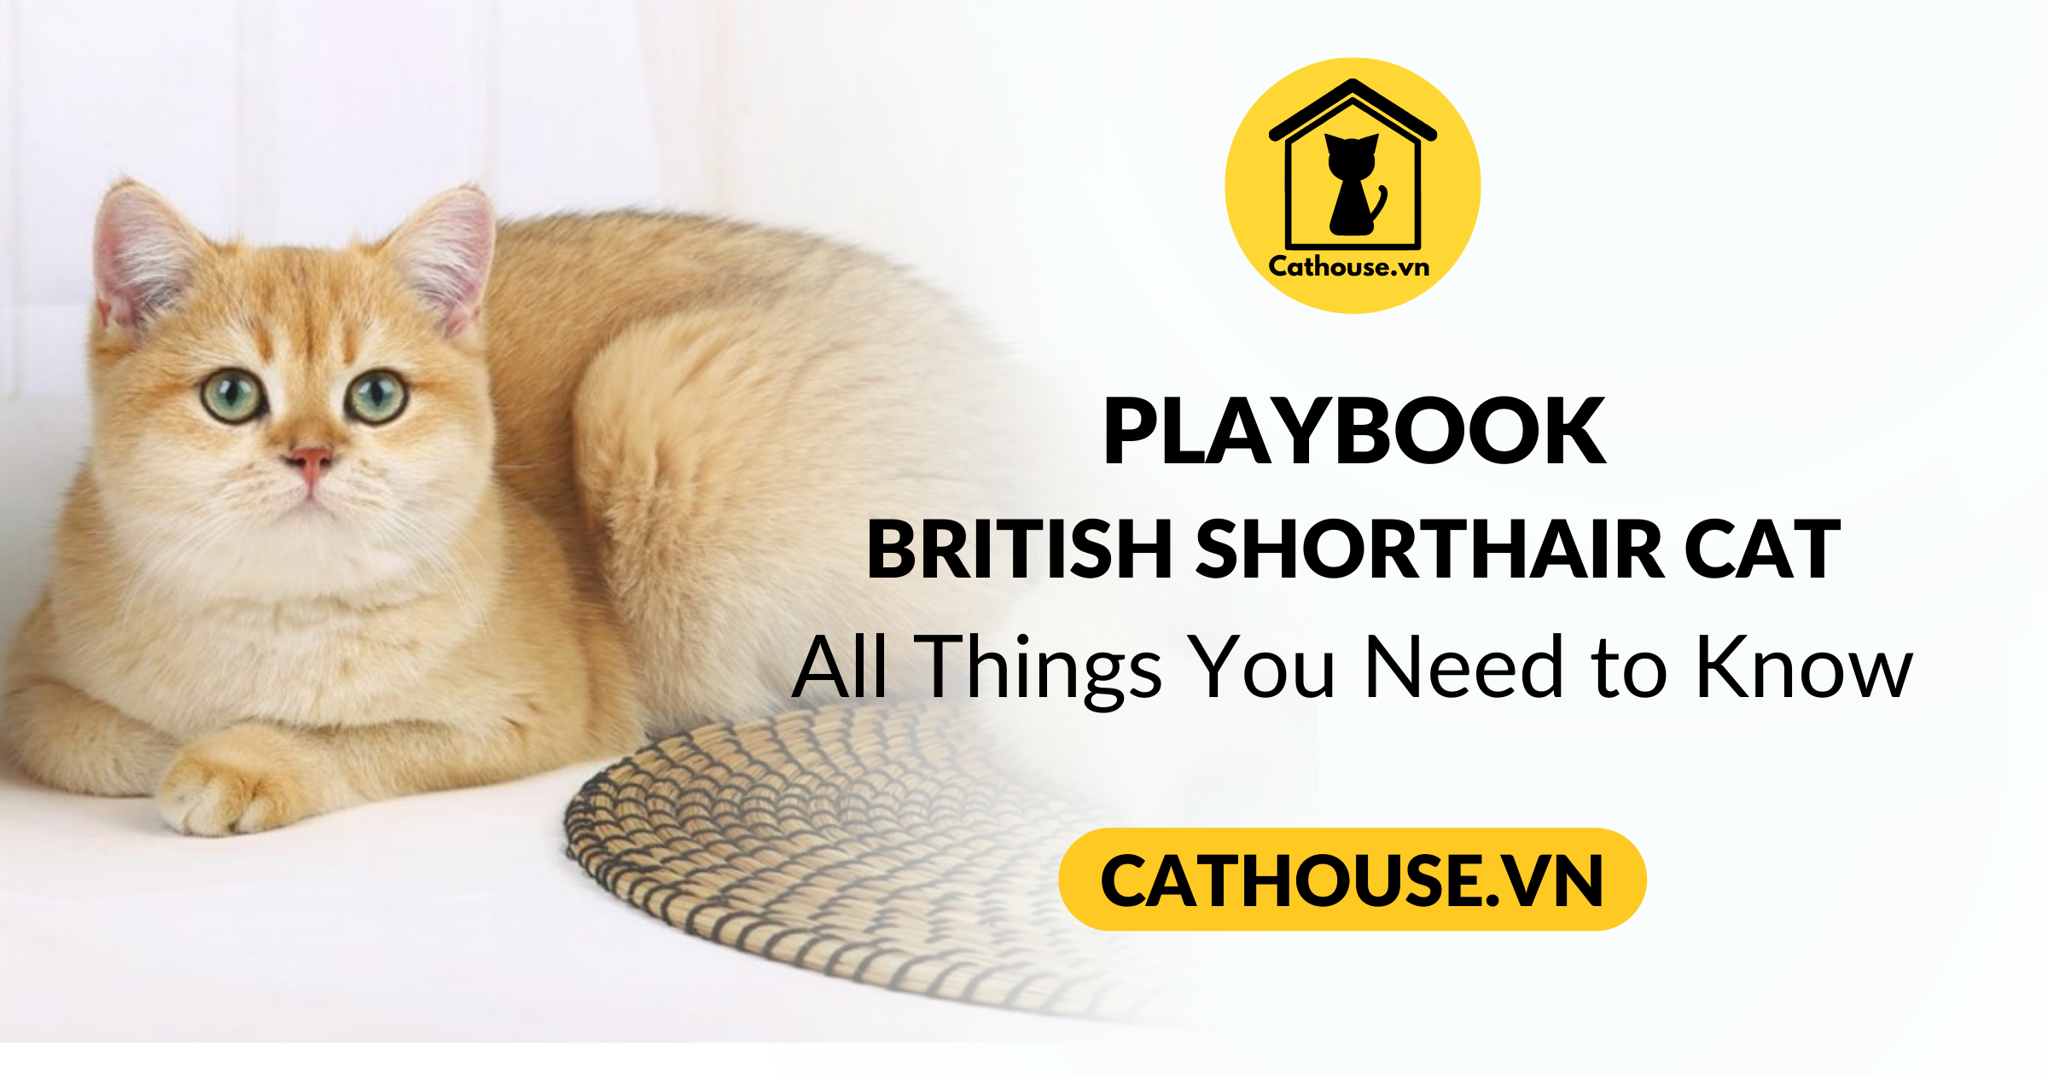 British Shorthair Cats and All Things You Need to Know